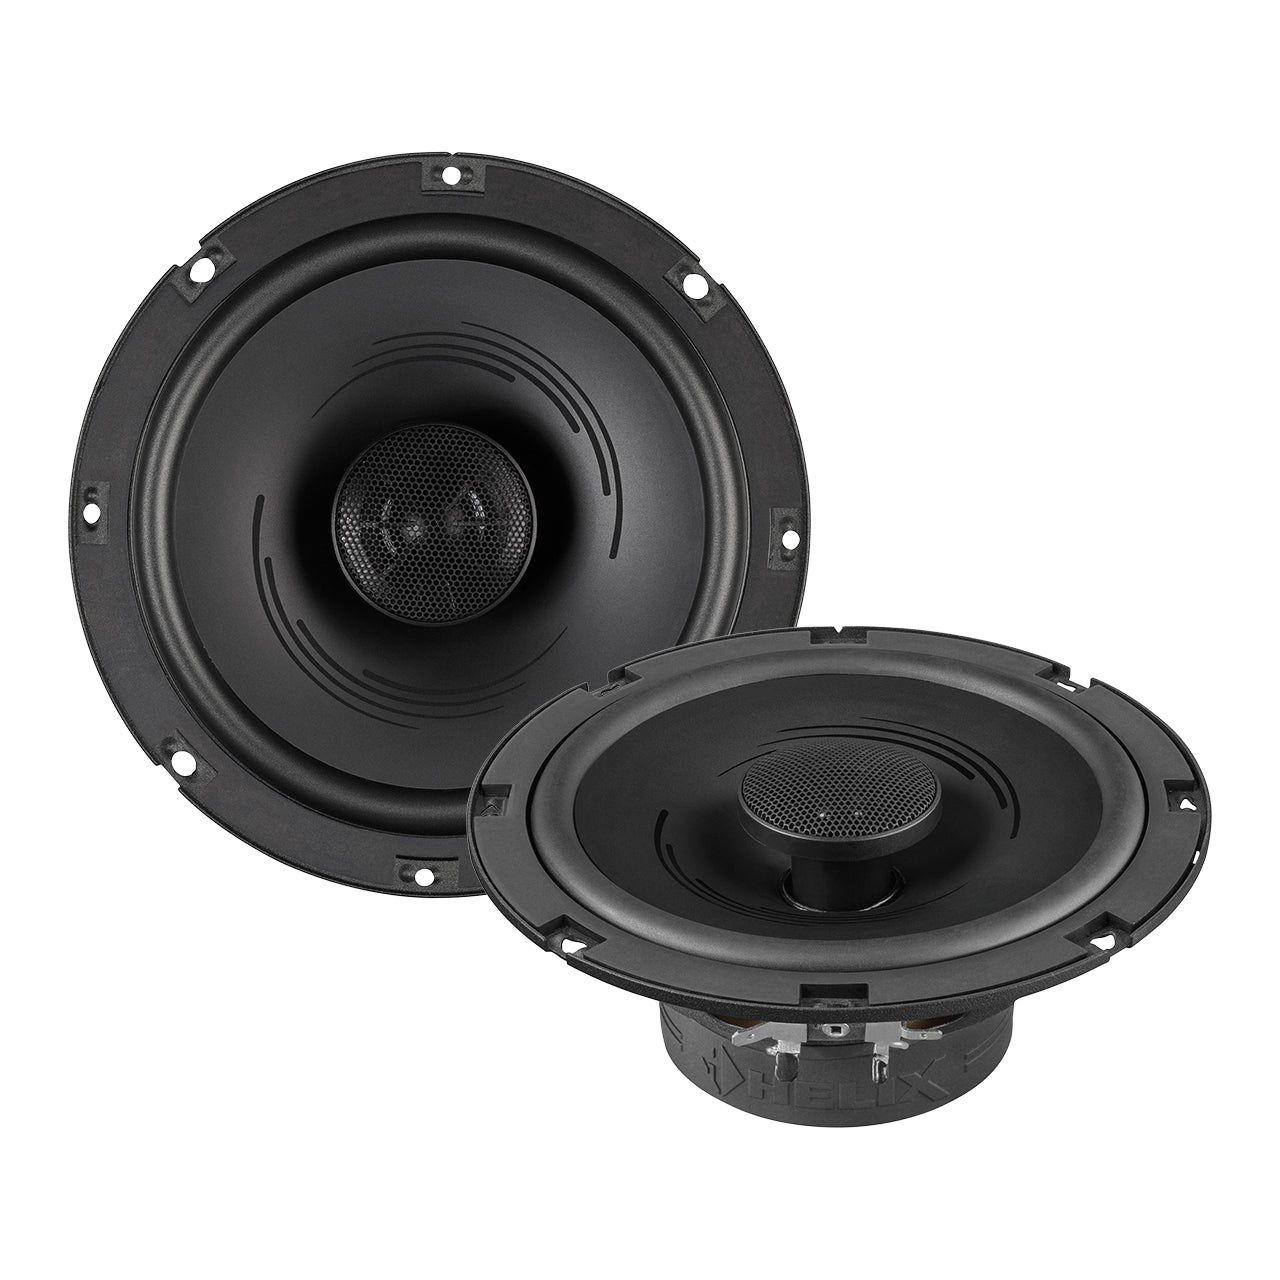 HELIX PF C165.2 6.5" COAXIAL SPEAKERS